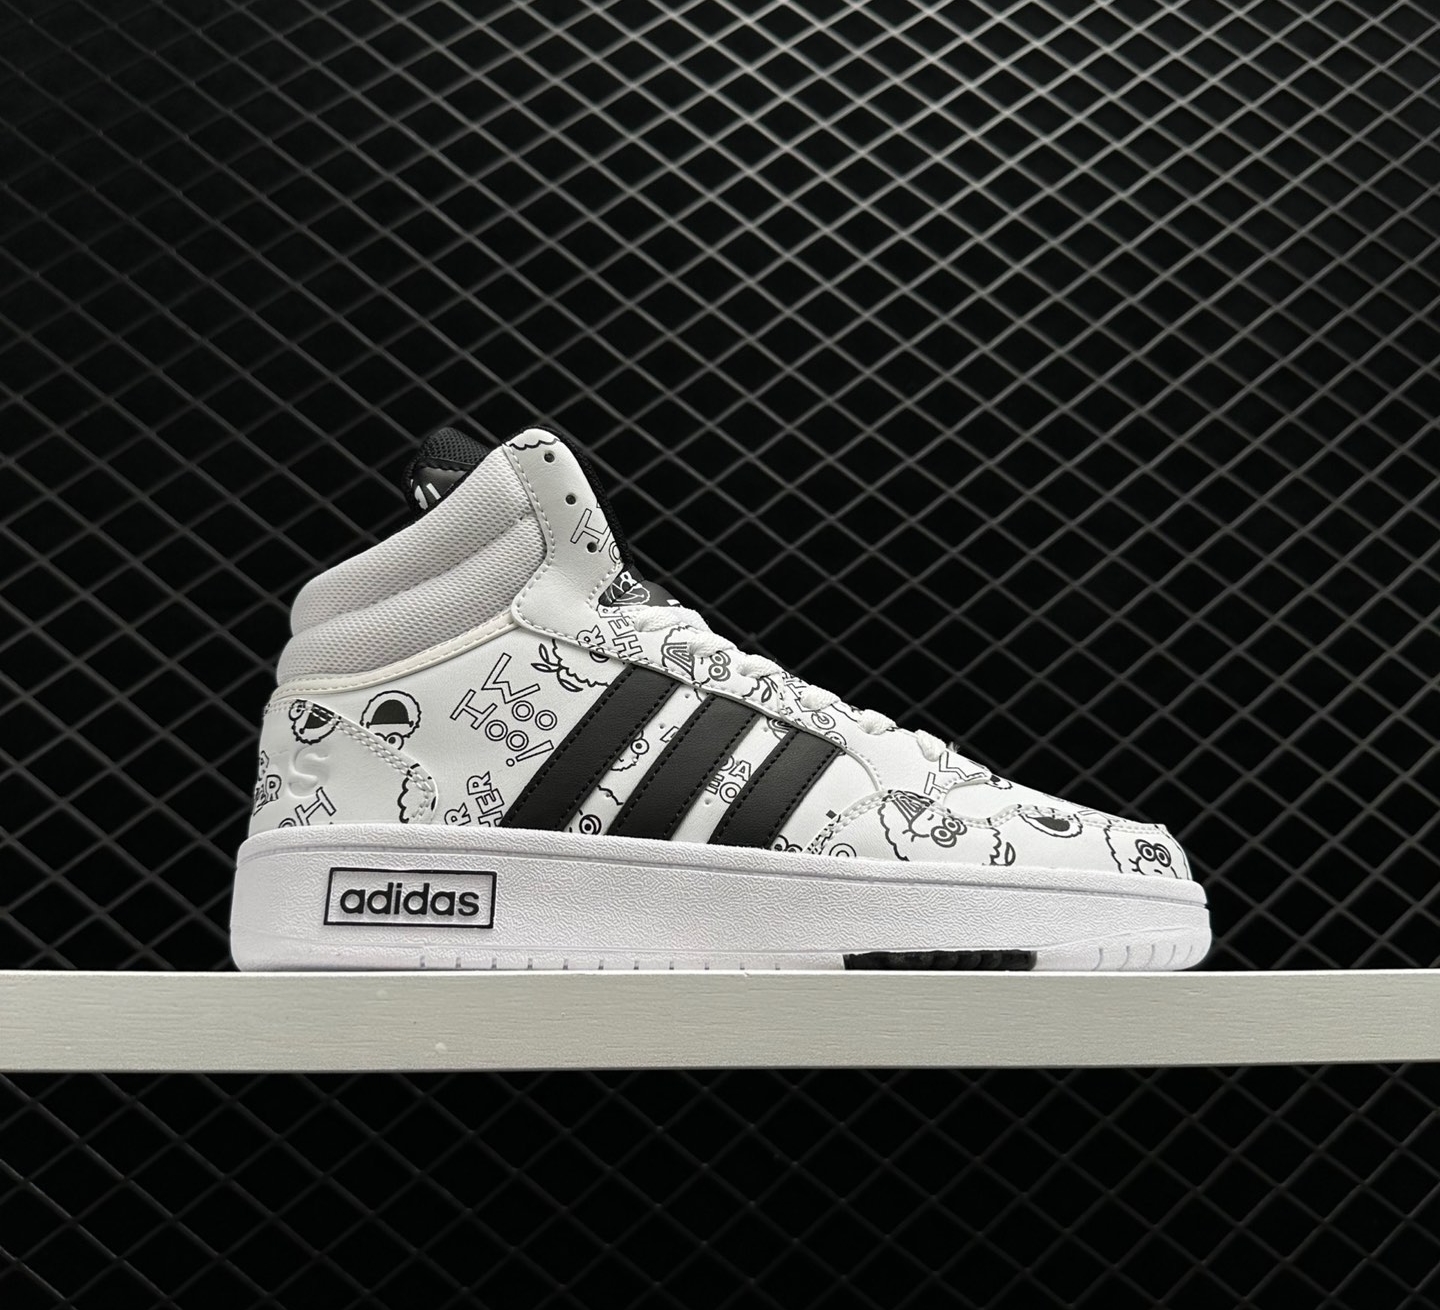 Adidas Neo Hoops 3.0 Mid GZ4859 - Stylish and Versatile Sneakers